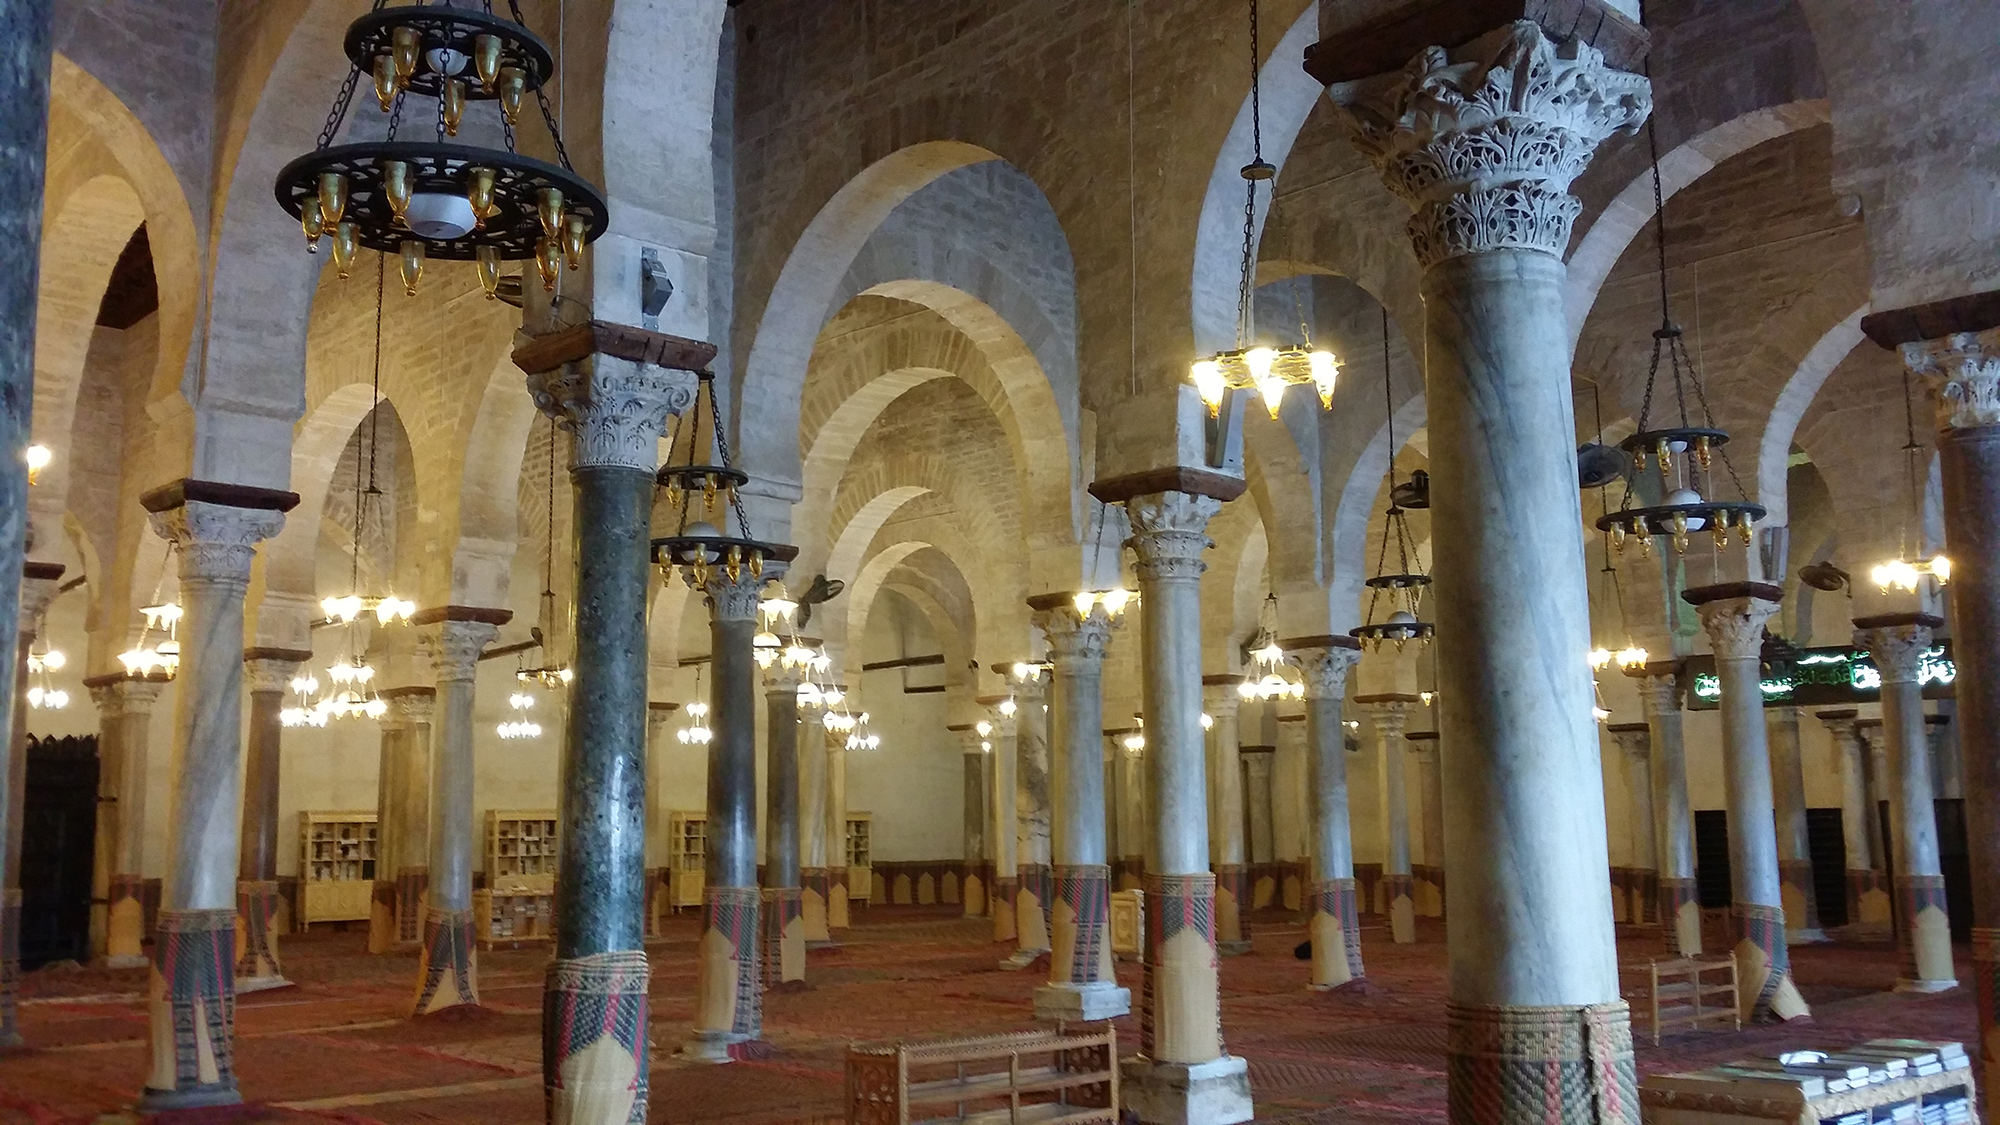 Great Mosque of Kairouan is considered one of the key Tunisian cultural and religious monuments